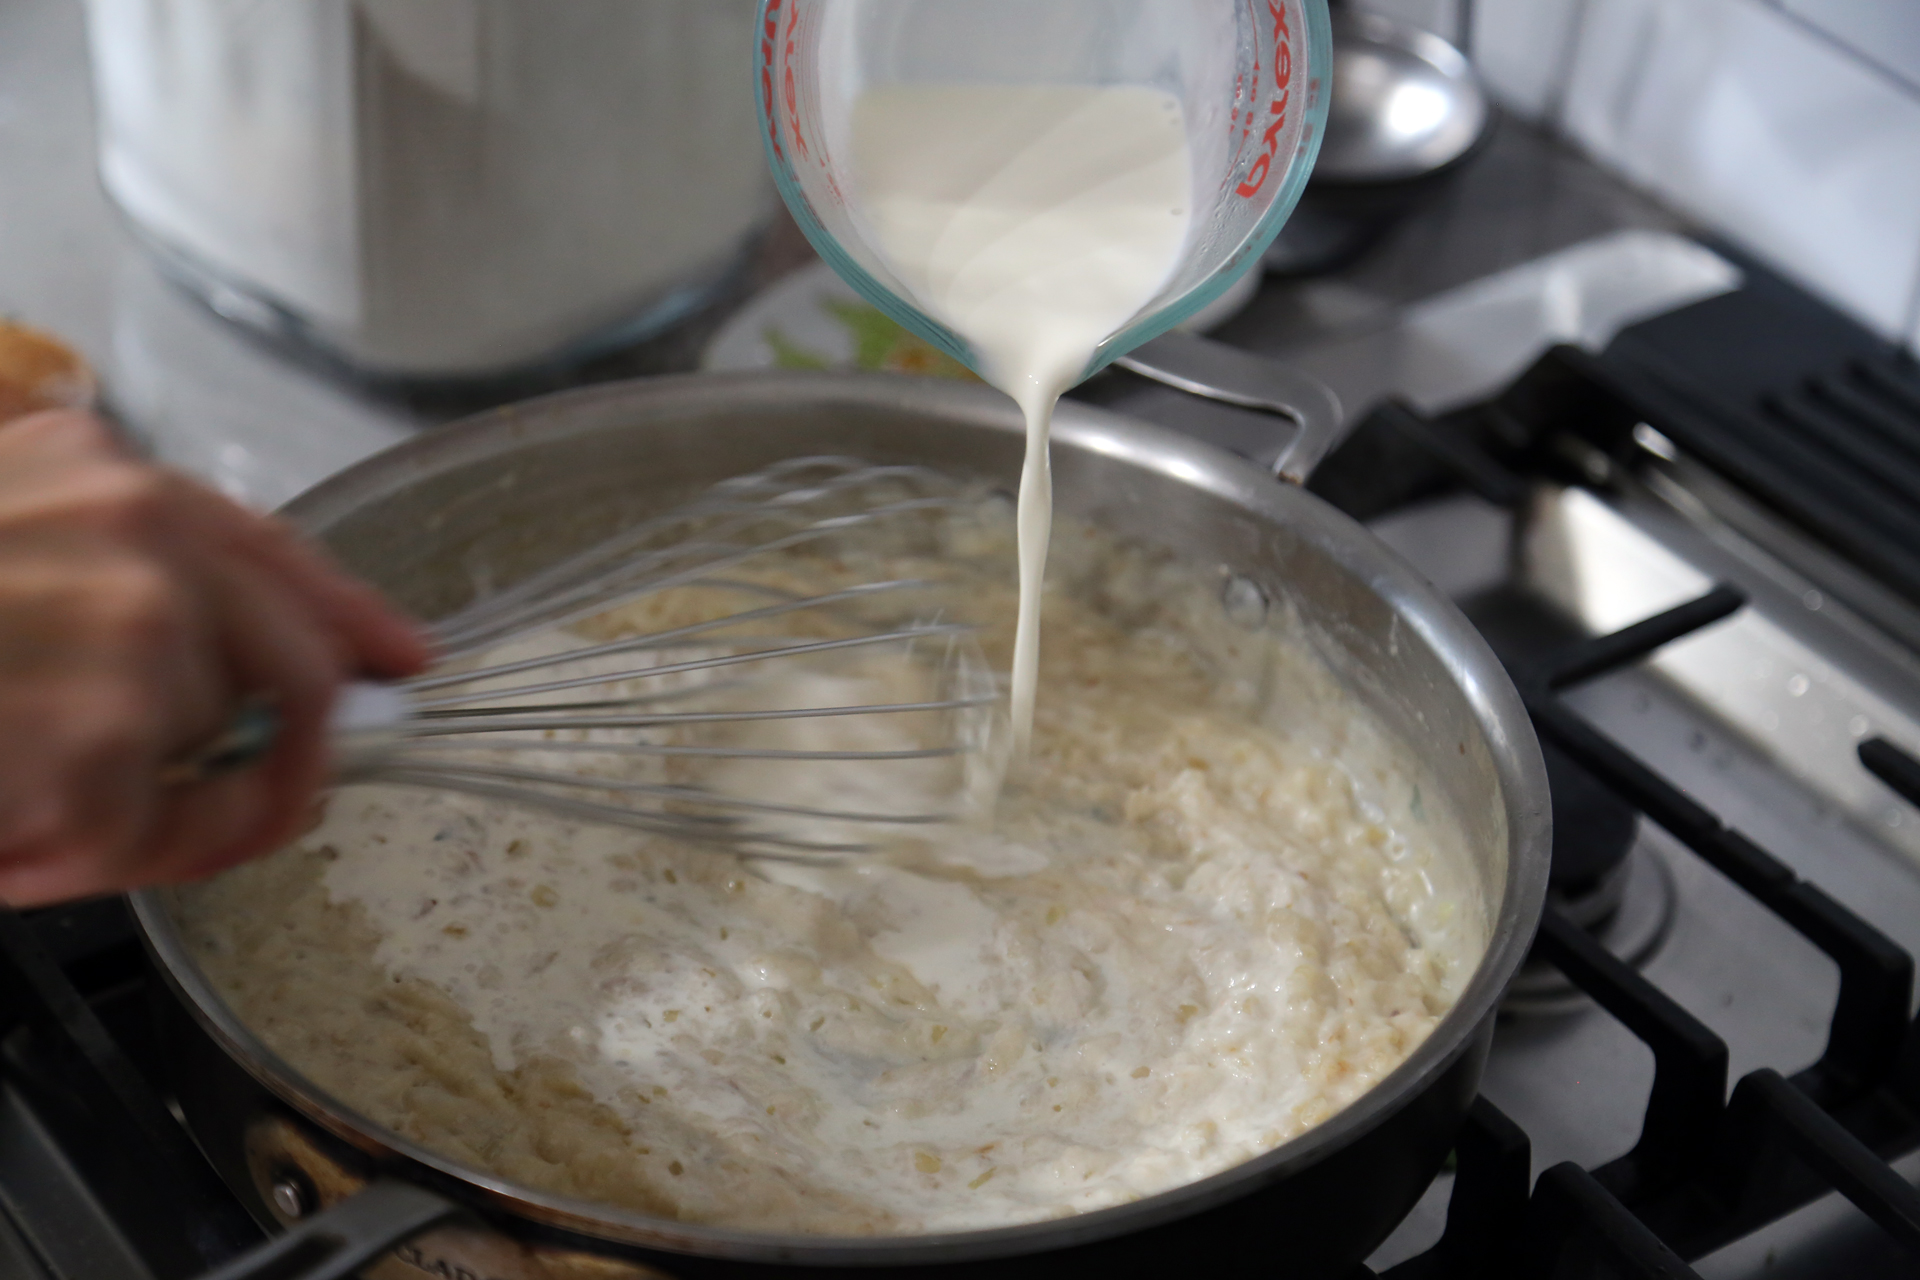 Gradually whisk in the milk, stirring until smooth. Whisk in the cream.